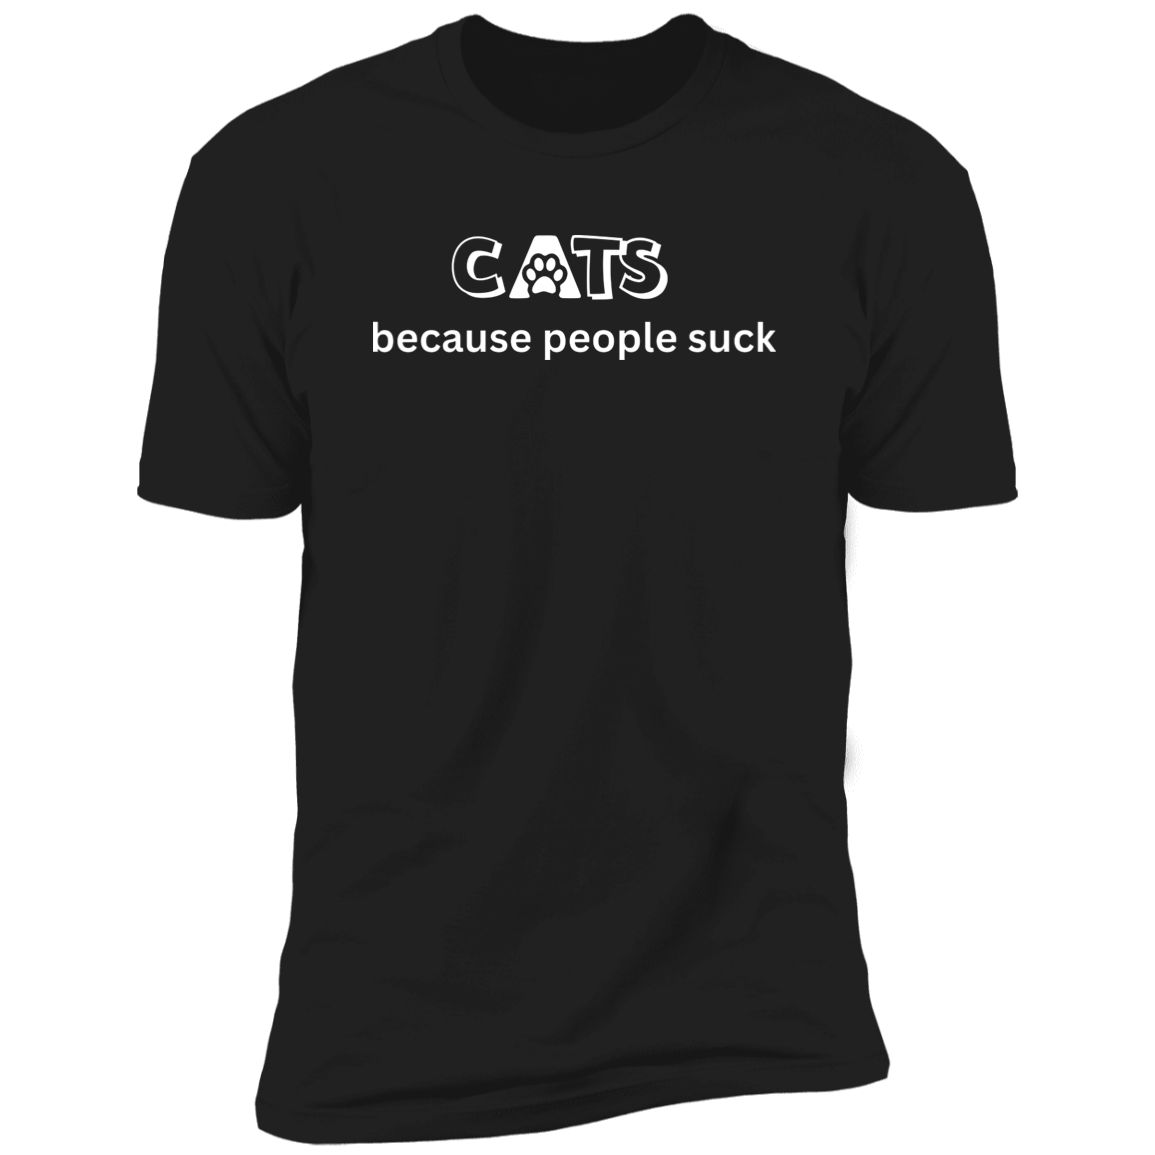 Cats Because People Suck T-shirt, Cat Shirt for humans, in black 